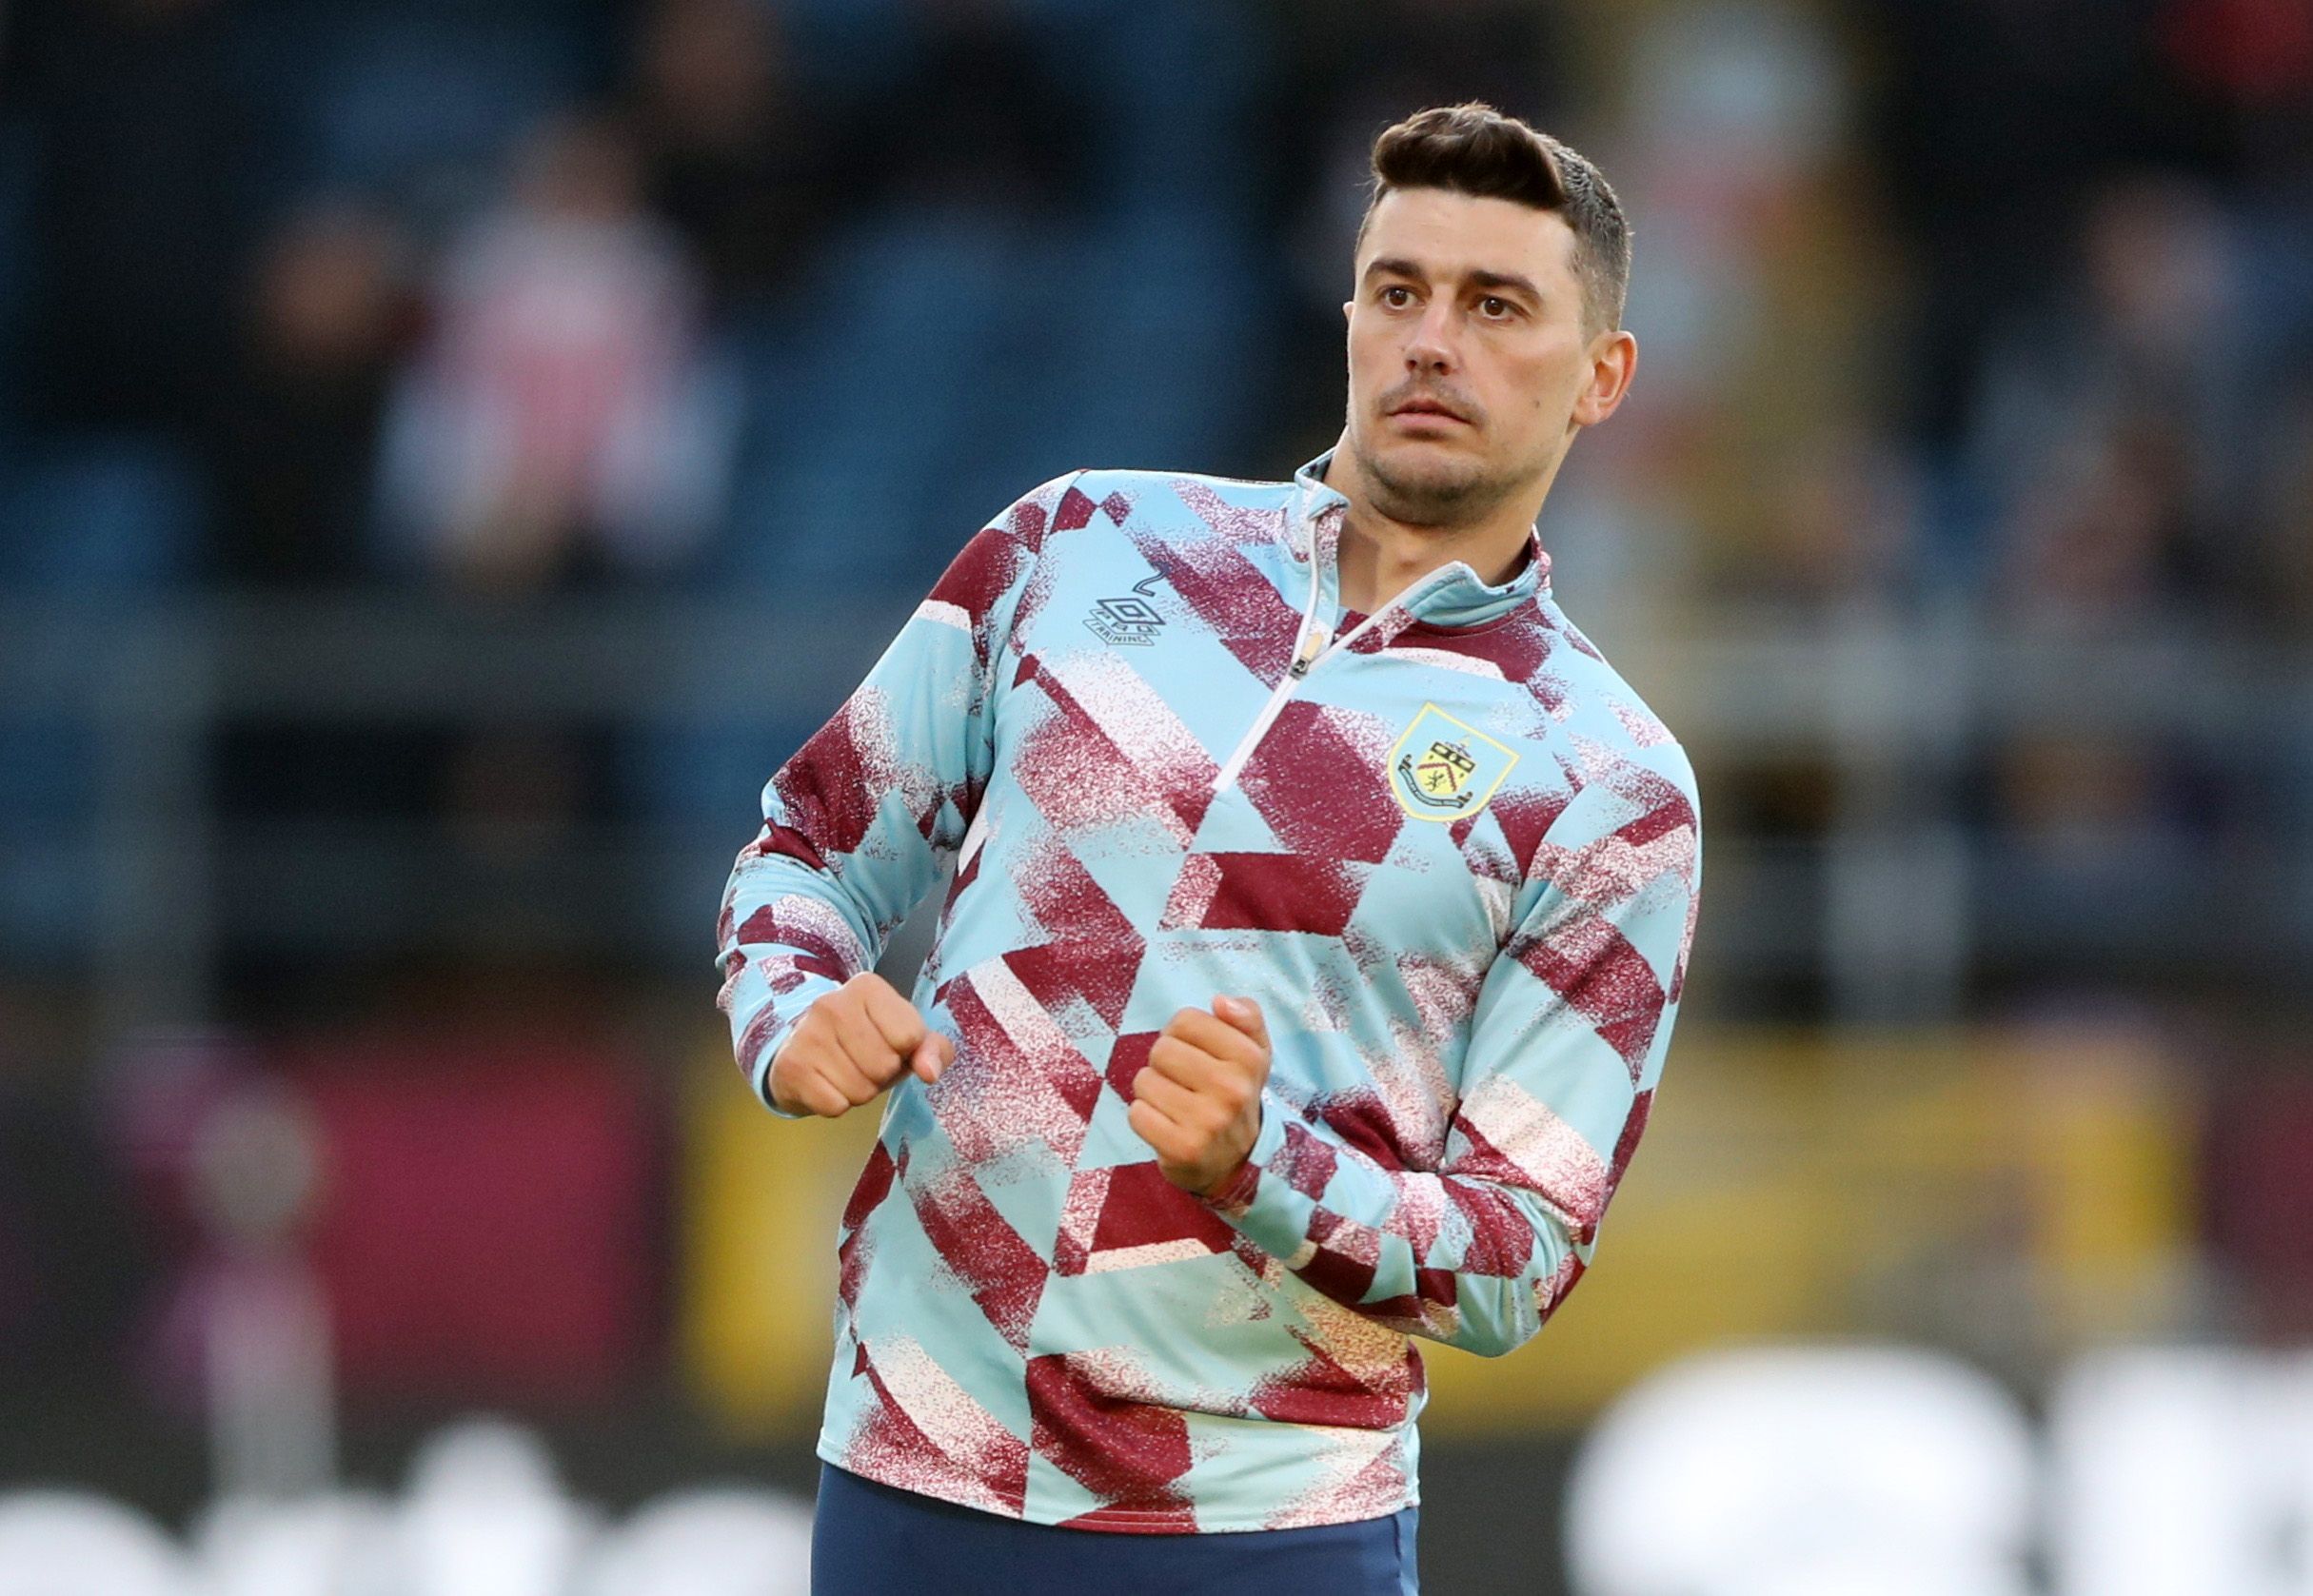 Soccer Football - Premier League - Burnley v Southampton - Turf Moor, Burnley, Britain - April 21, 2022 Burnley's Matthew Lowton during the warm up before the match Action Images via Reuters/Molly Darlington EDITORIAL USE ONLY. No use with unauthorized audio, video, data, fixture lists, club/league logos or 'live' services. Online in-match use limited to 75 images, no video emulation. No use in betting, games or single club /league/player publications.  Please contact your account representative